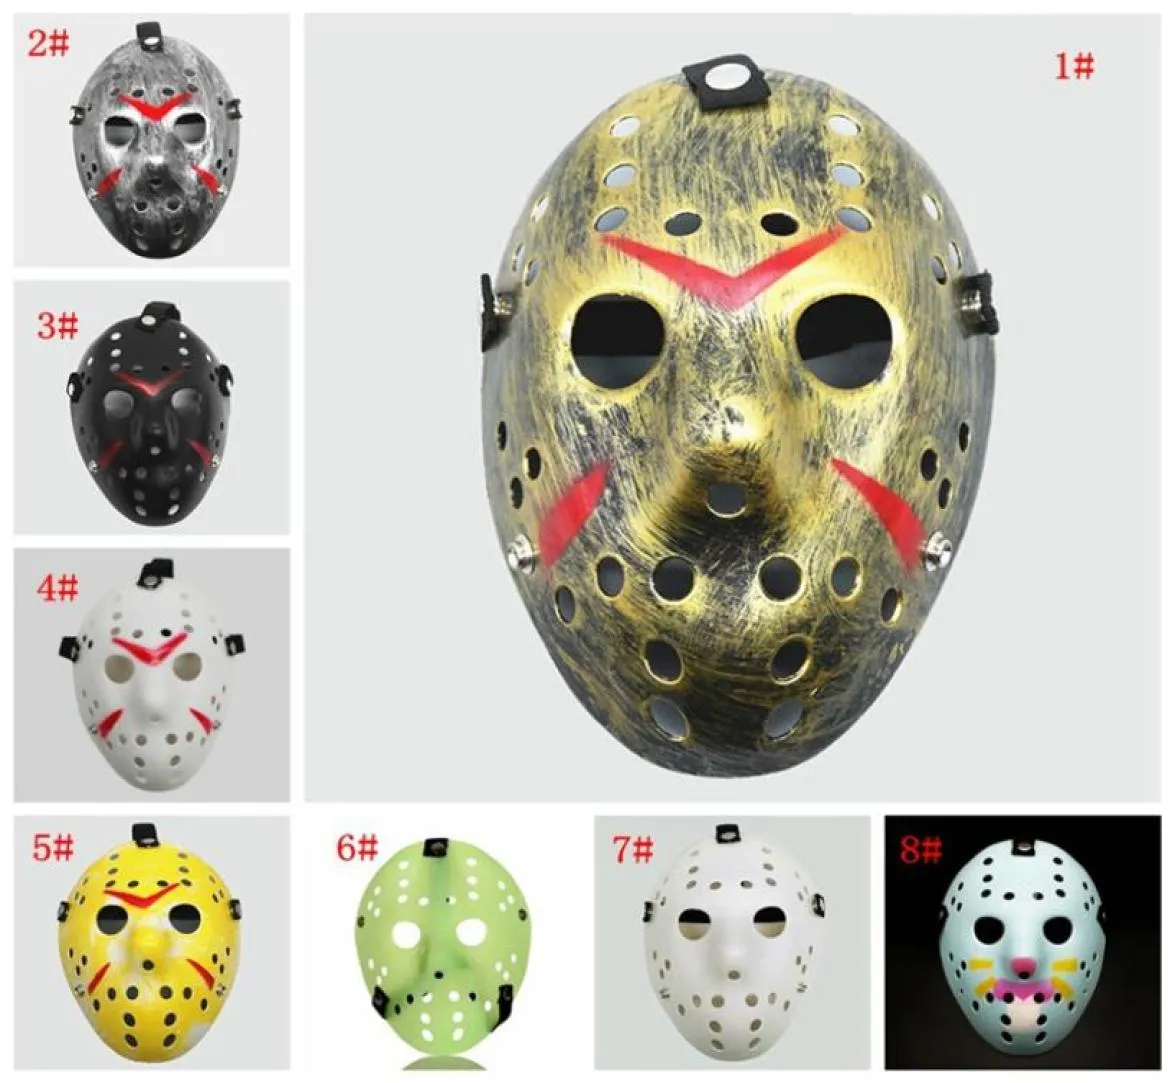 Masquerade Masks Jason Voorhees Mask Friday the 13th Horror Movie Hockey Mask Scary Halloween Costume Cosplay Plastic Party Masks 5390327